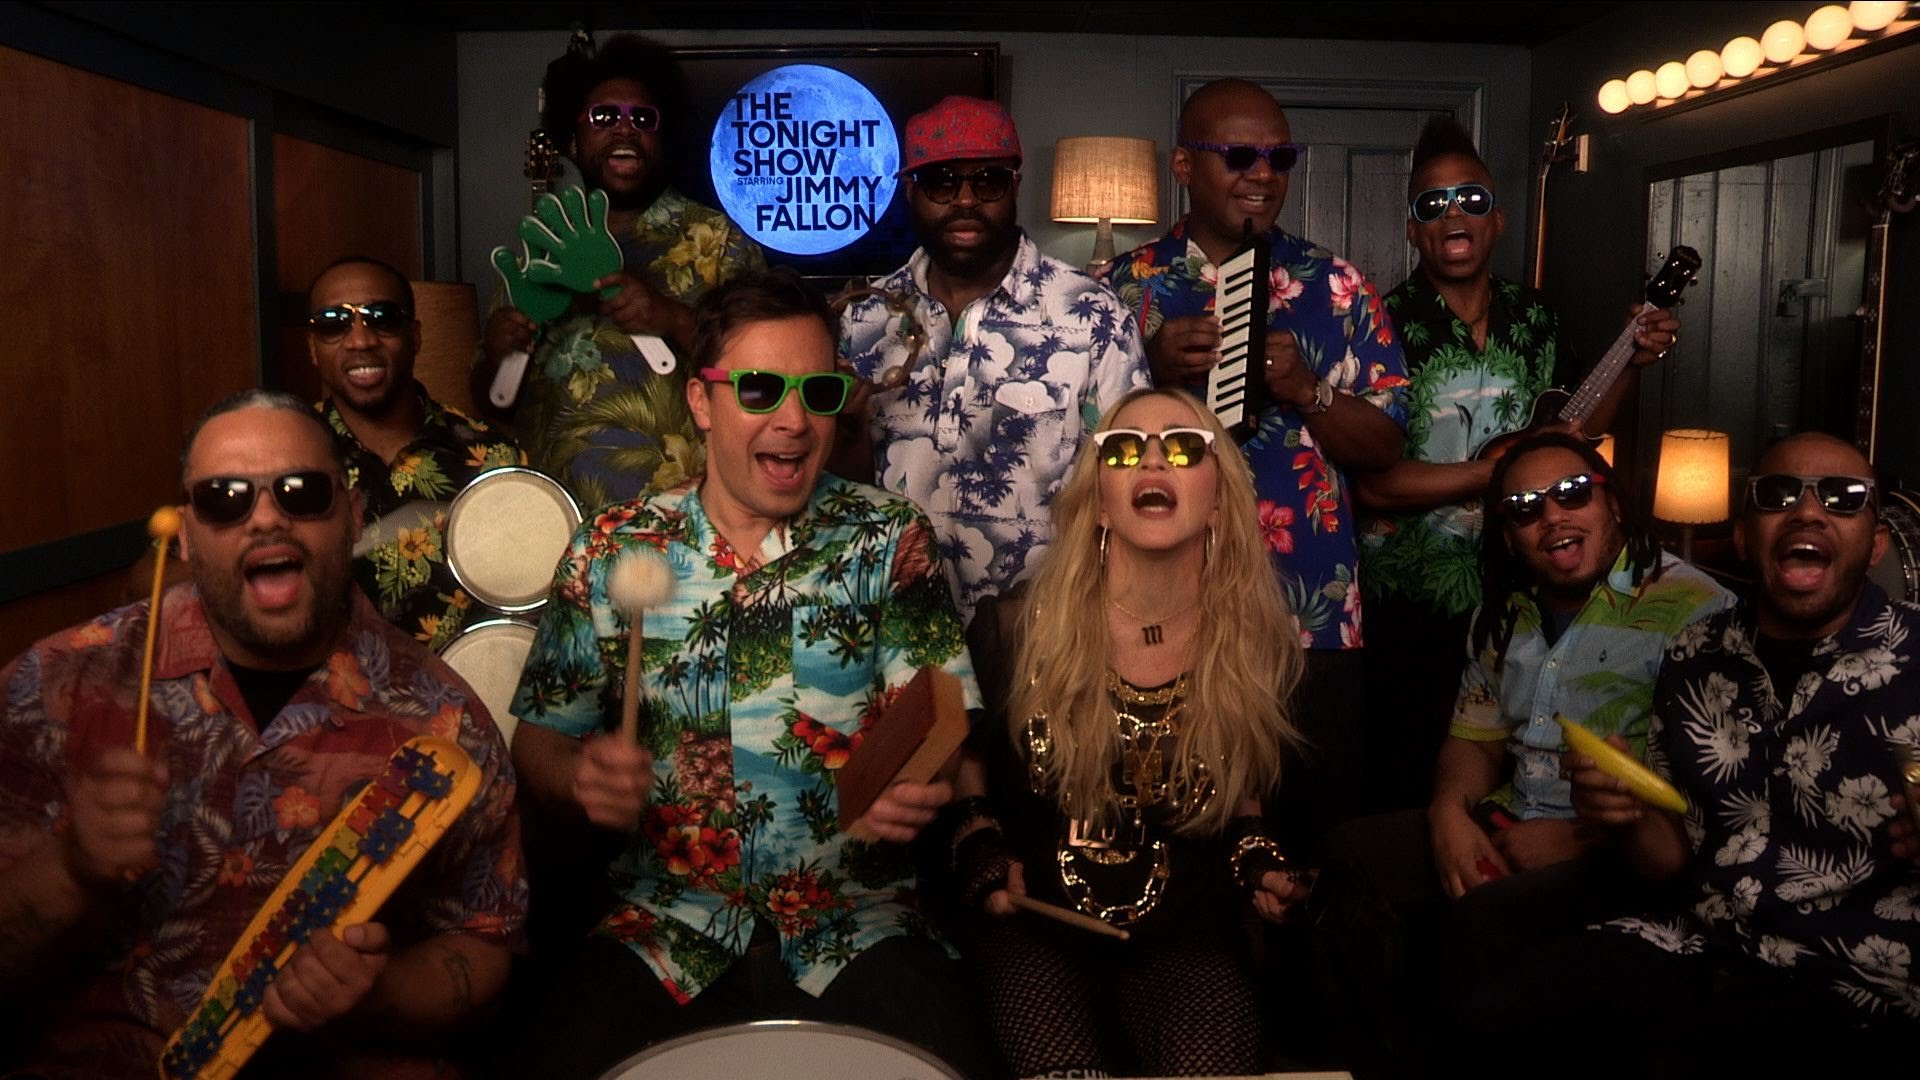 Madonna e Jimmy Fallon &#038; The Roots cantam &#8220;Holiday&#8230; It would be so nice&#8221;